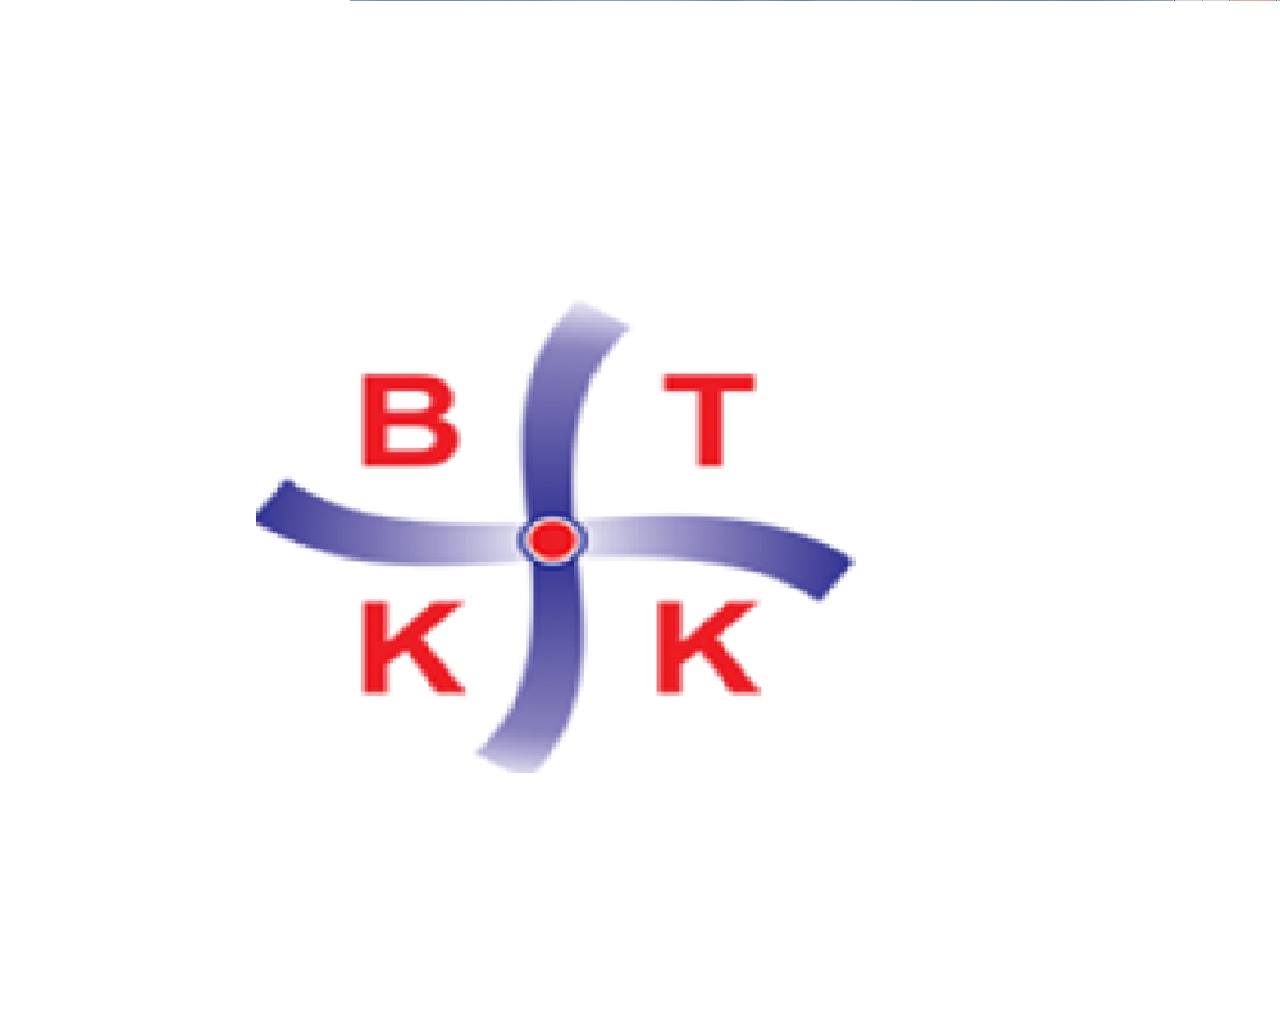 BTKK - Policy Research Group